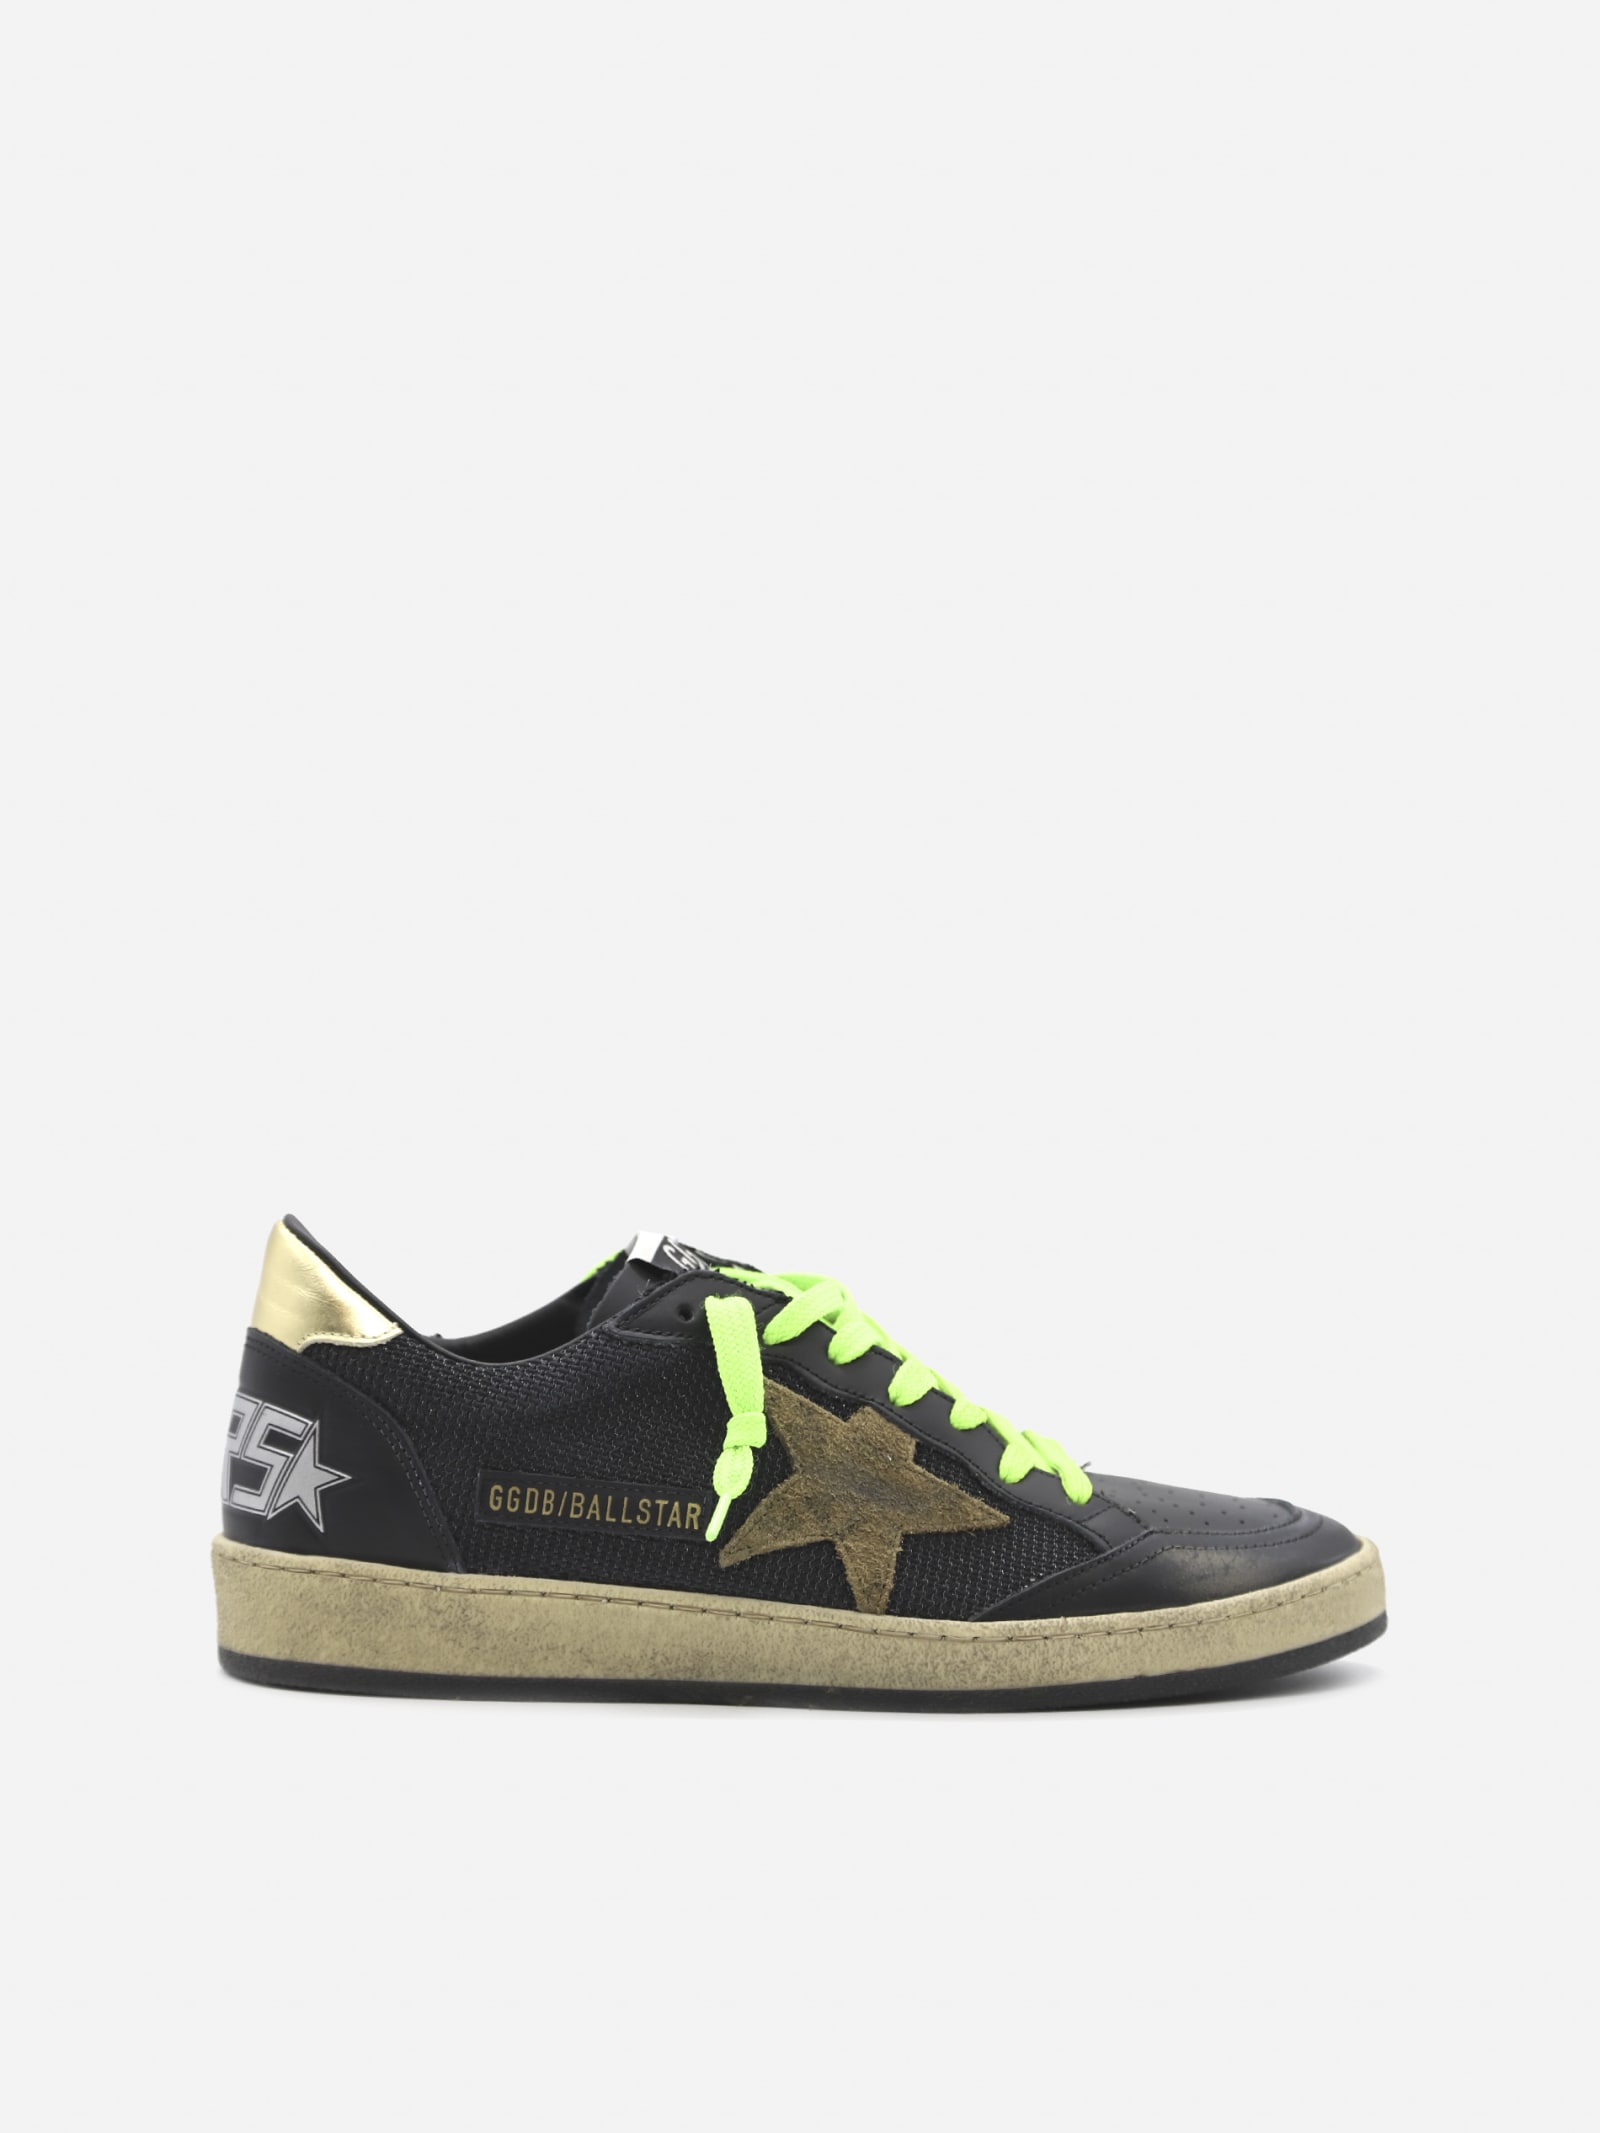 Golden Goose Ball Star Sneakers In Leather With Suede Inserts